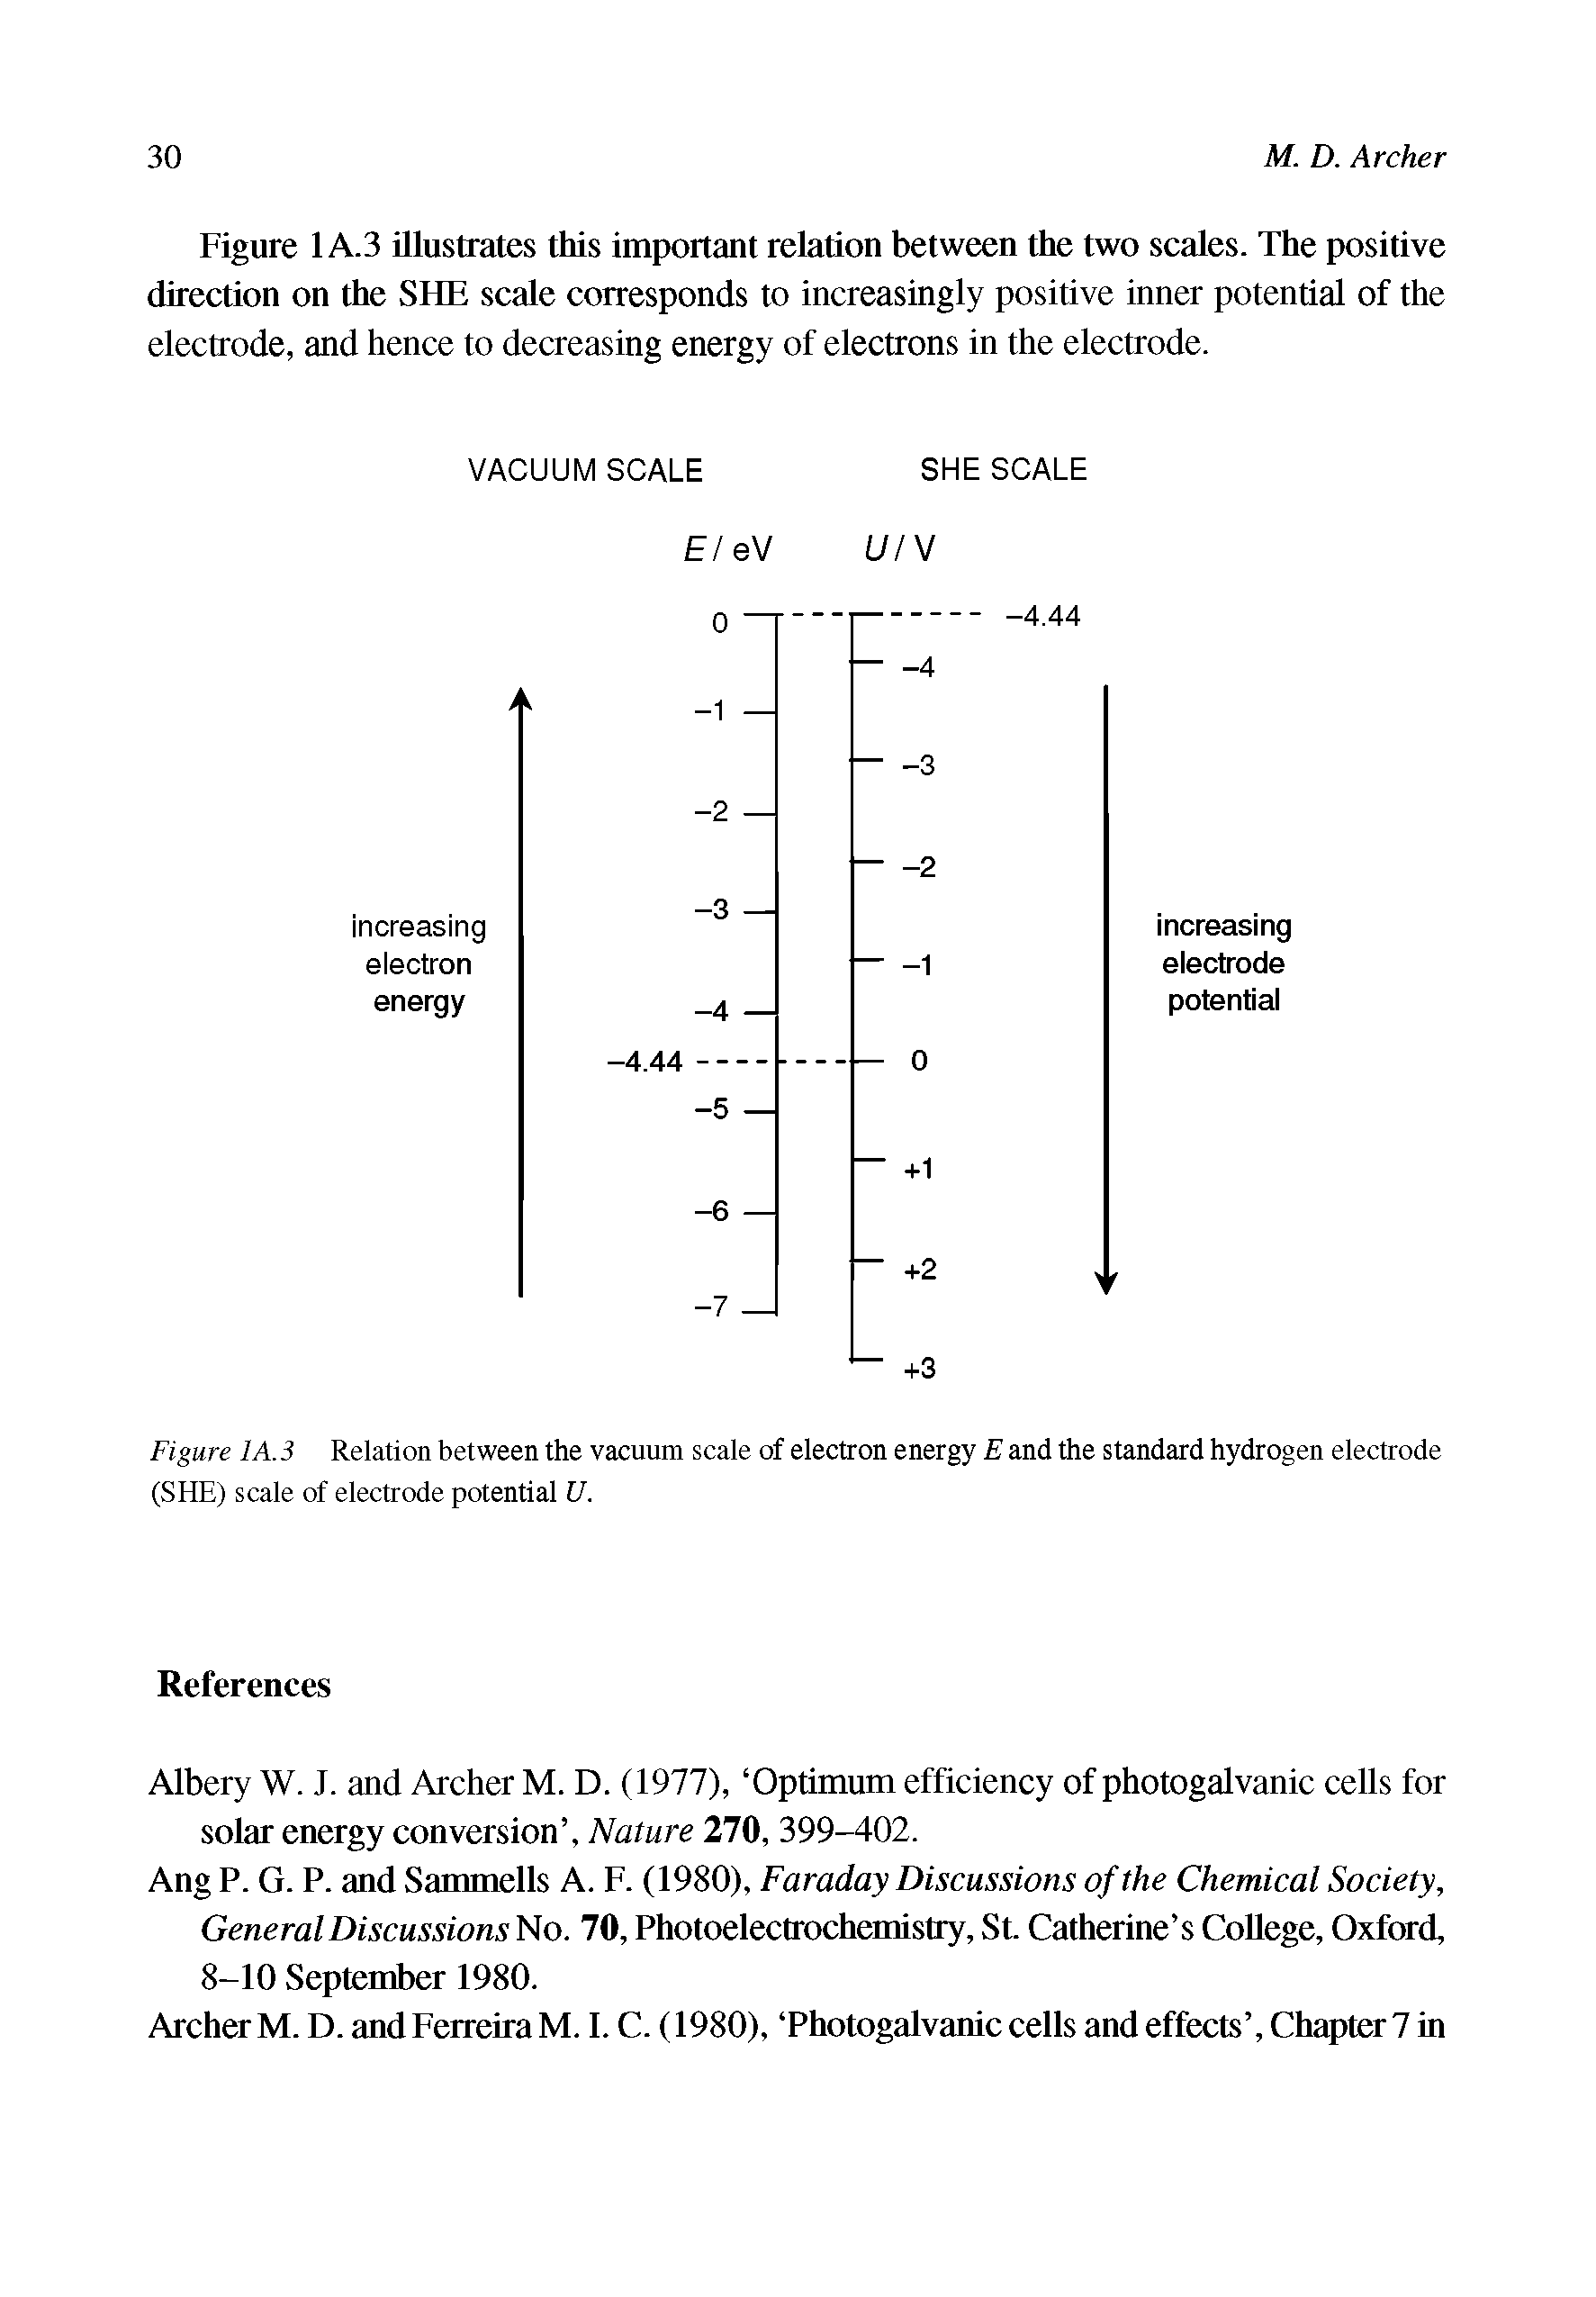 Figure 1A3 Relation between the vacuum scale of electron energy E and the standard hydrogen electrode (SHE) scale of electrode potential U.